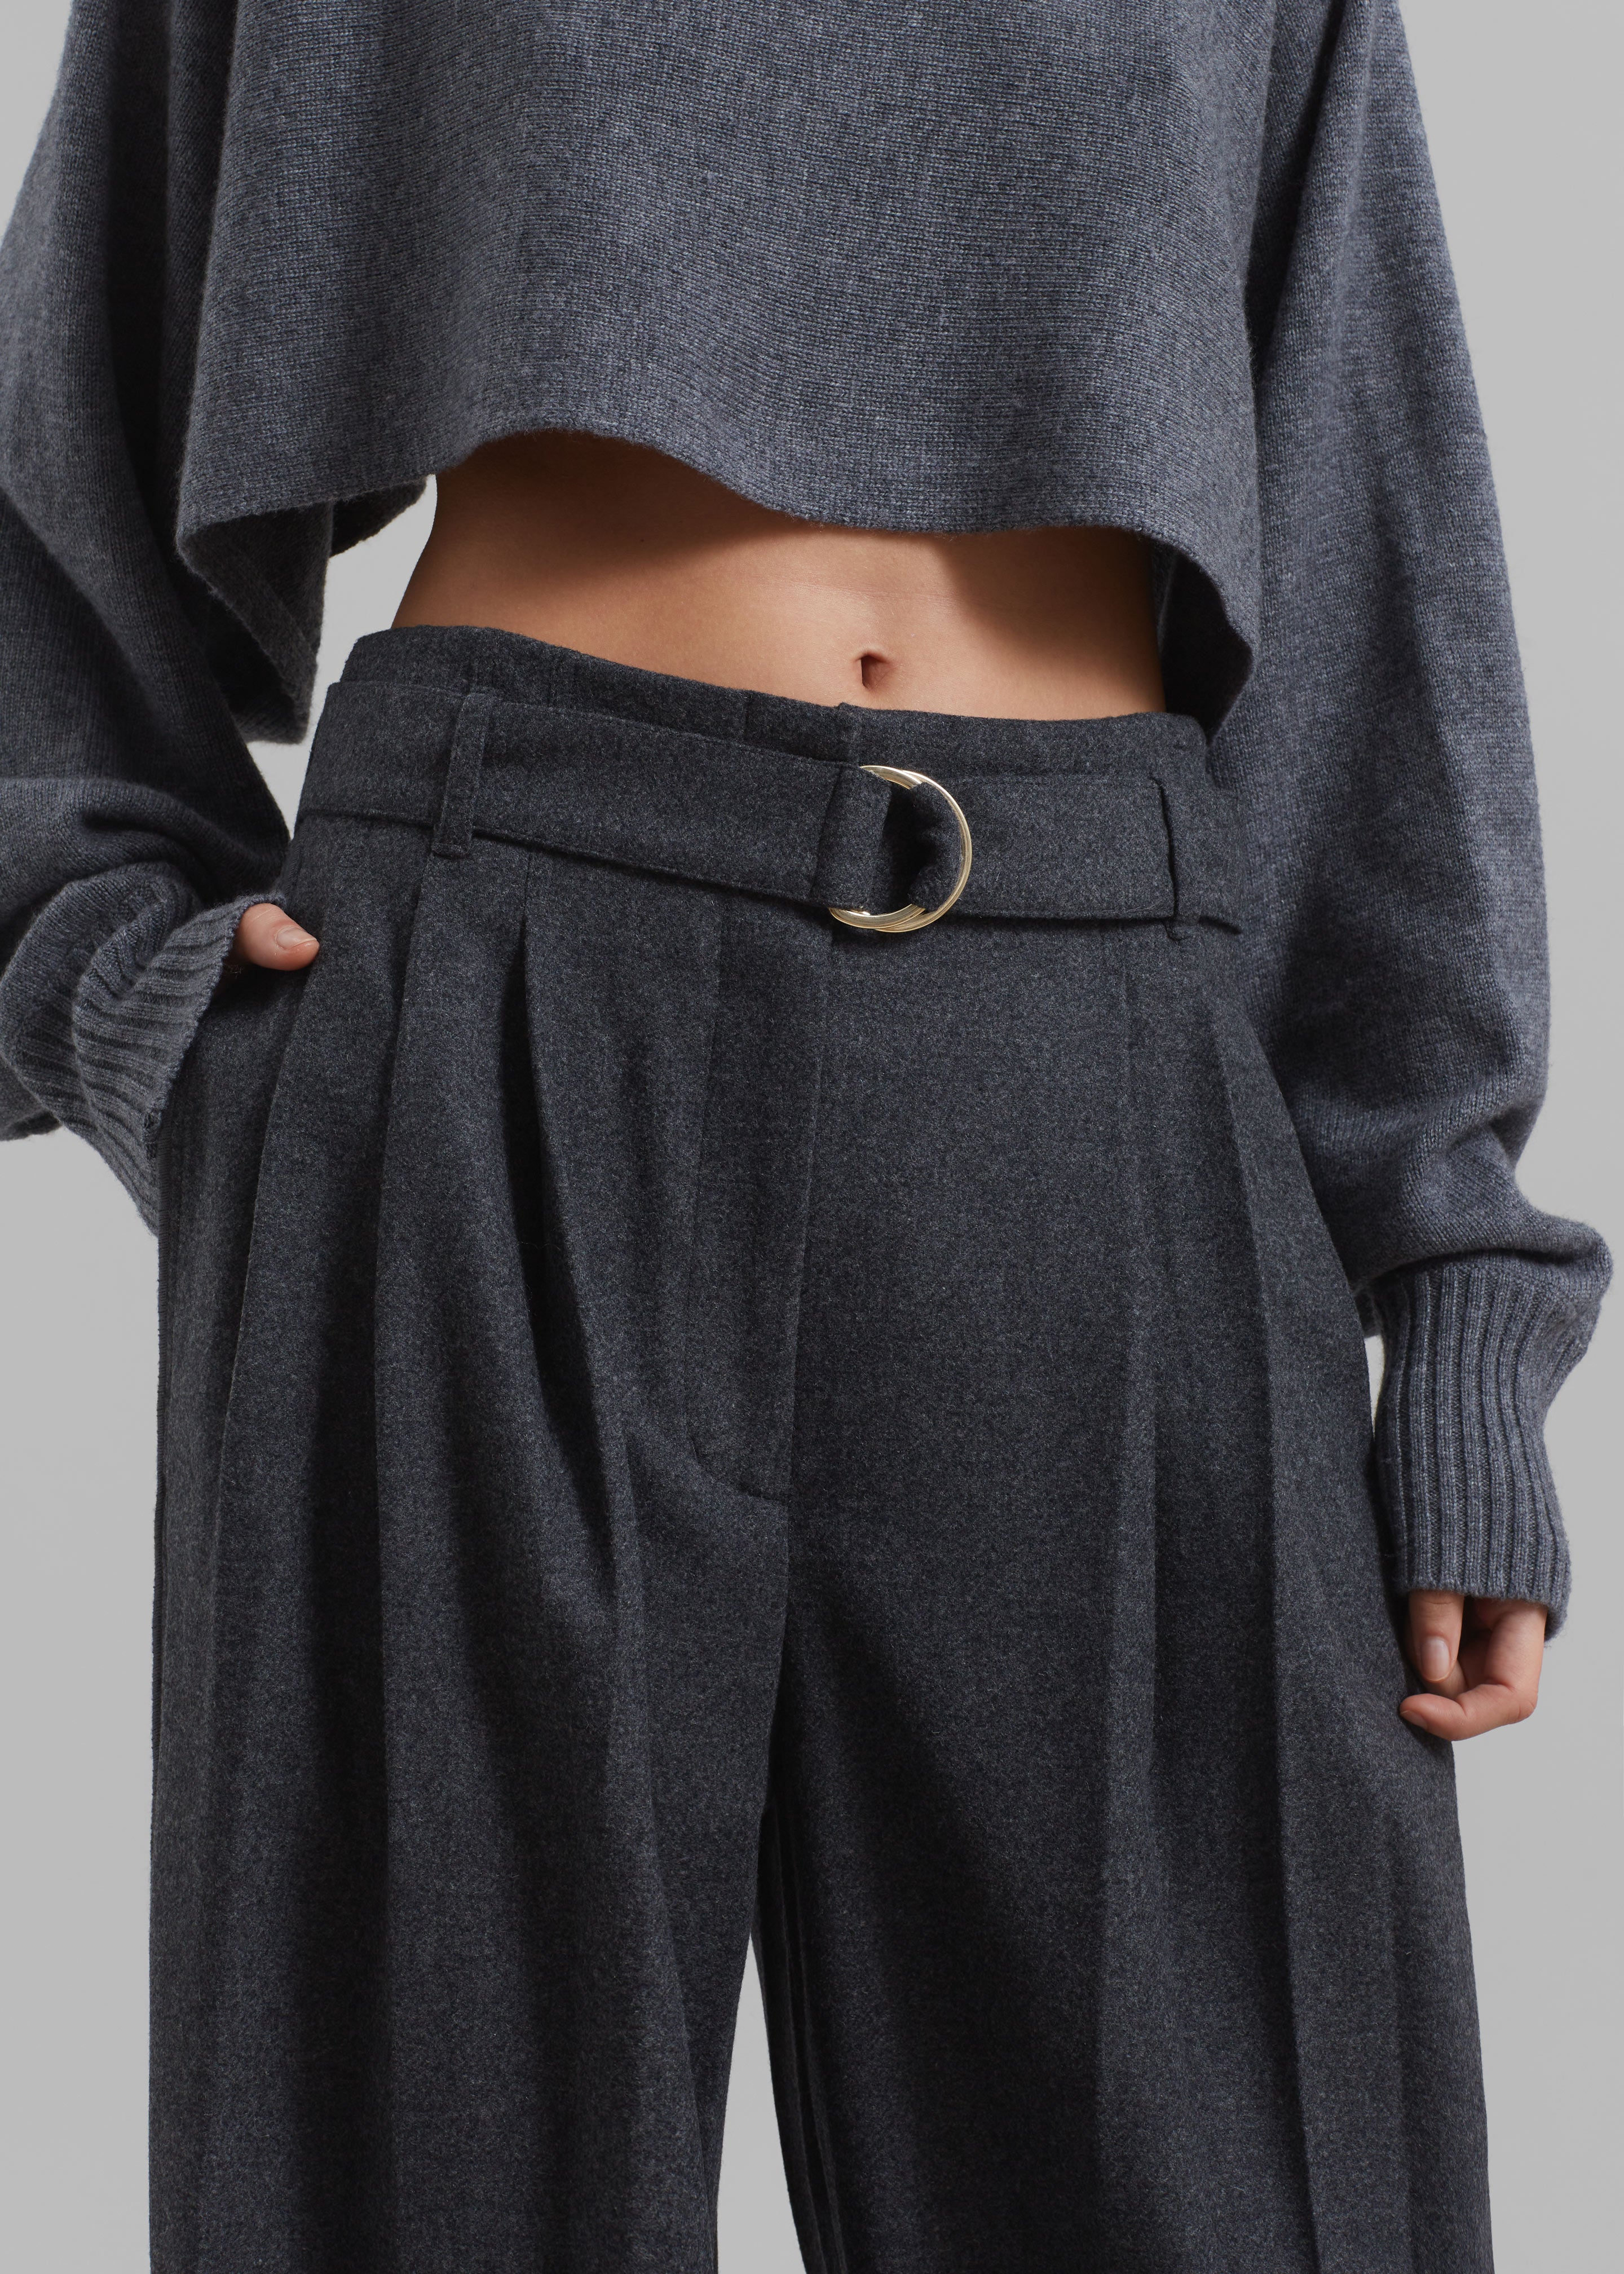 3.1 Phillip Lim Flannel Oversized Pleated Belted Pants - Charcoal - 3